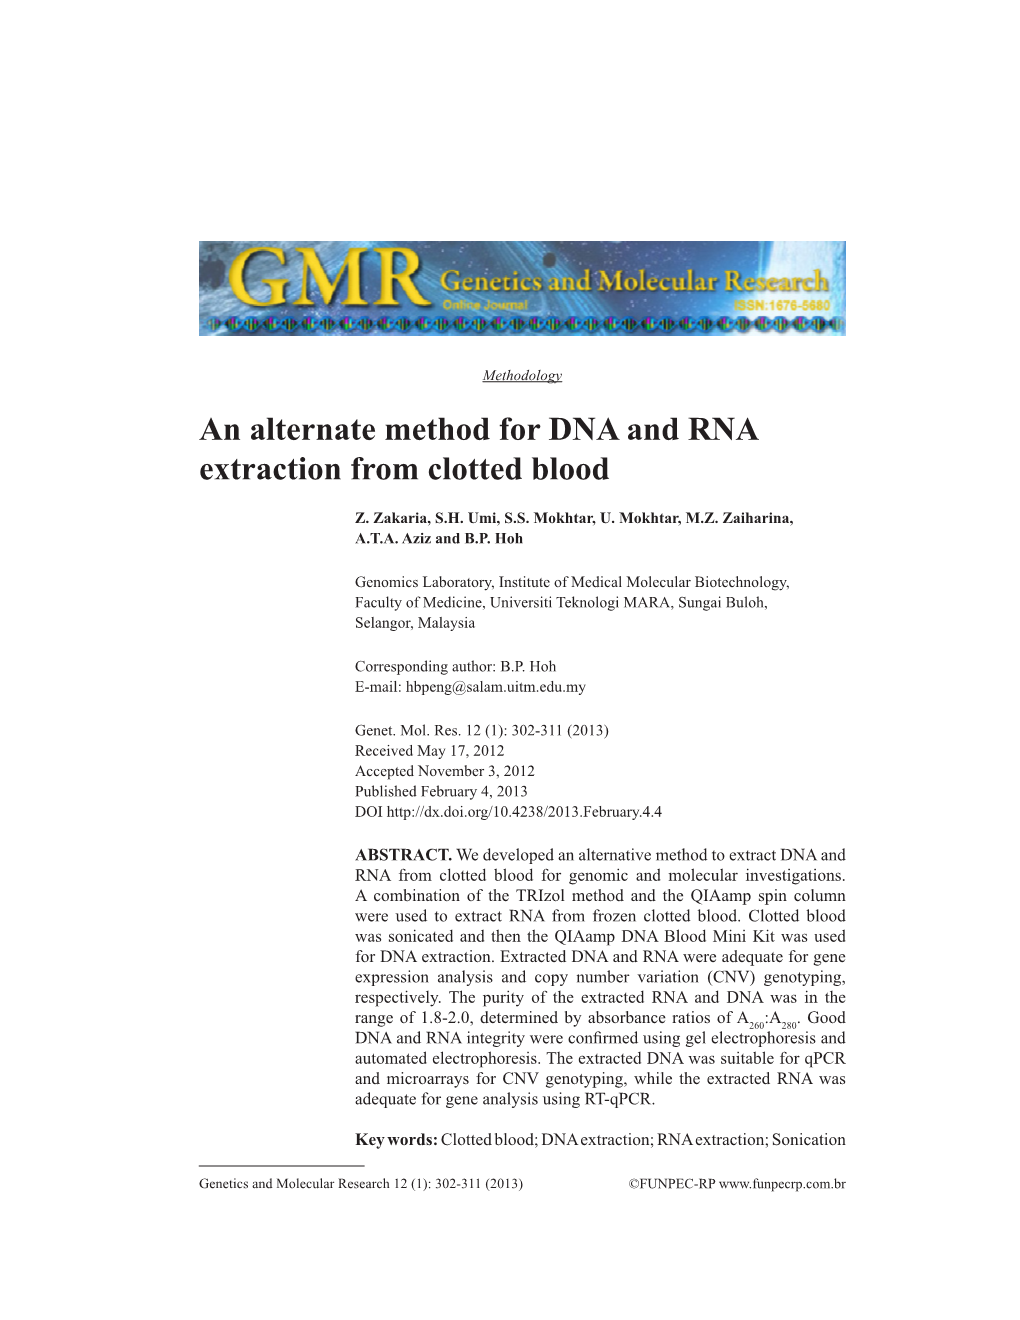 An Alternate Method for DNA and RNA Extraction from Clotted Blood